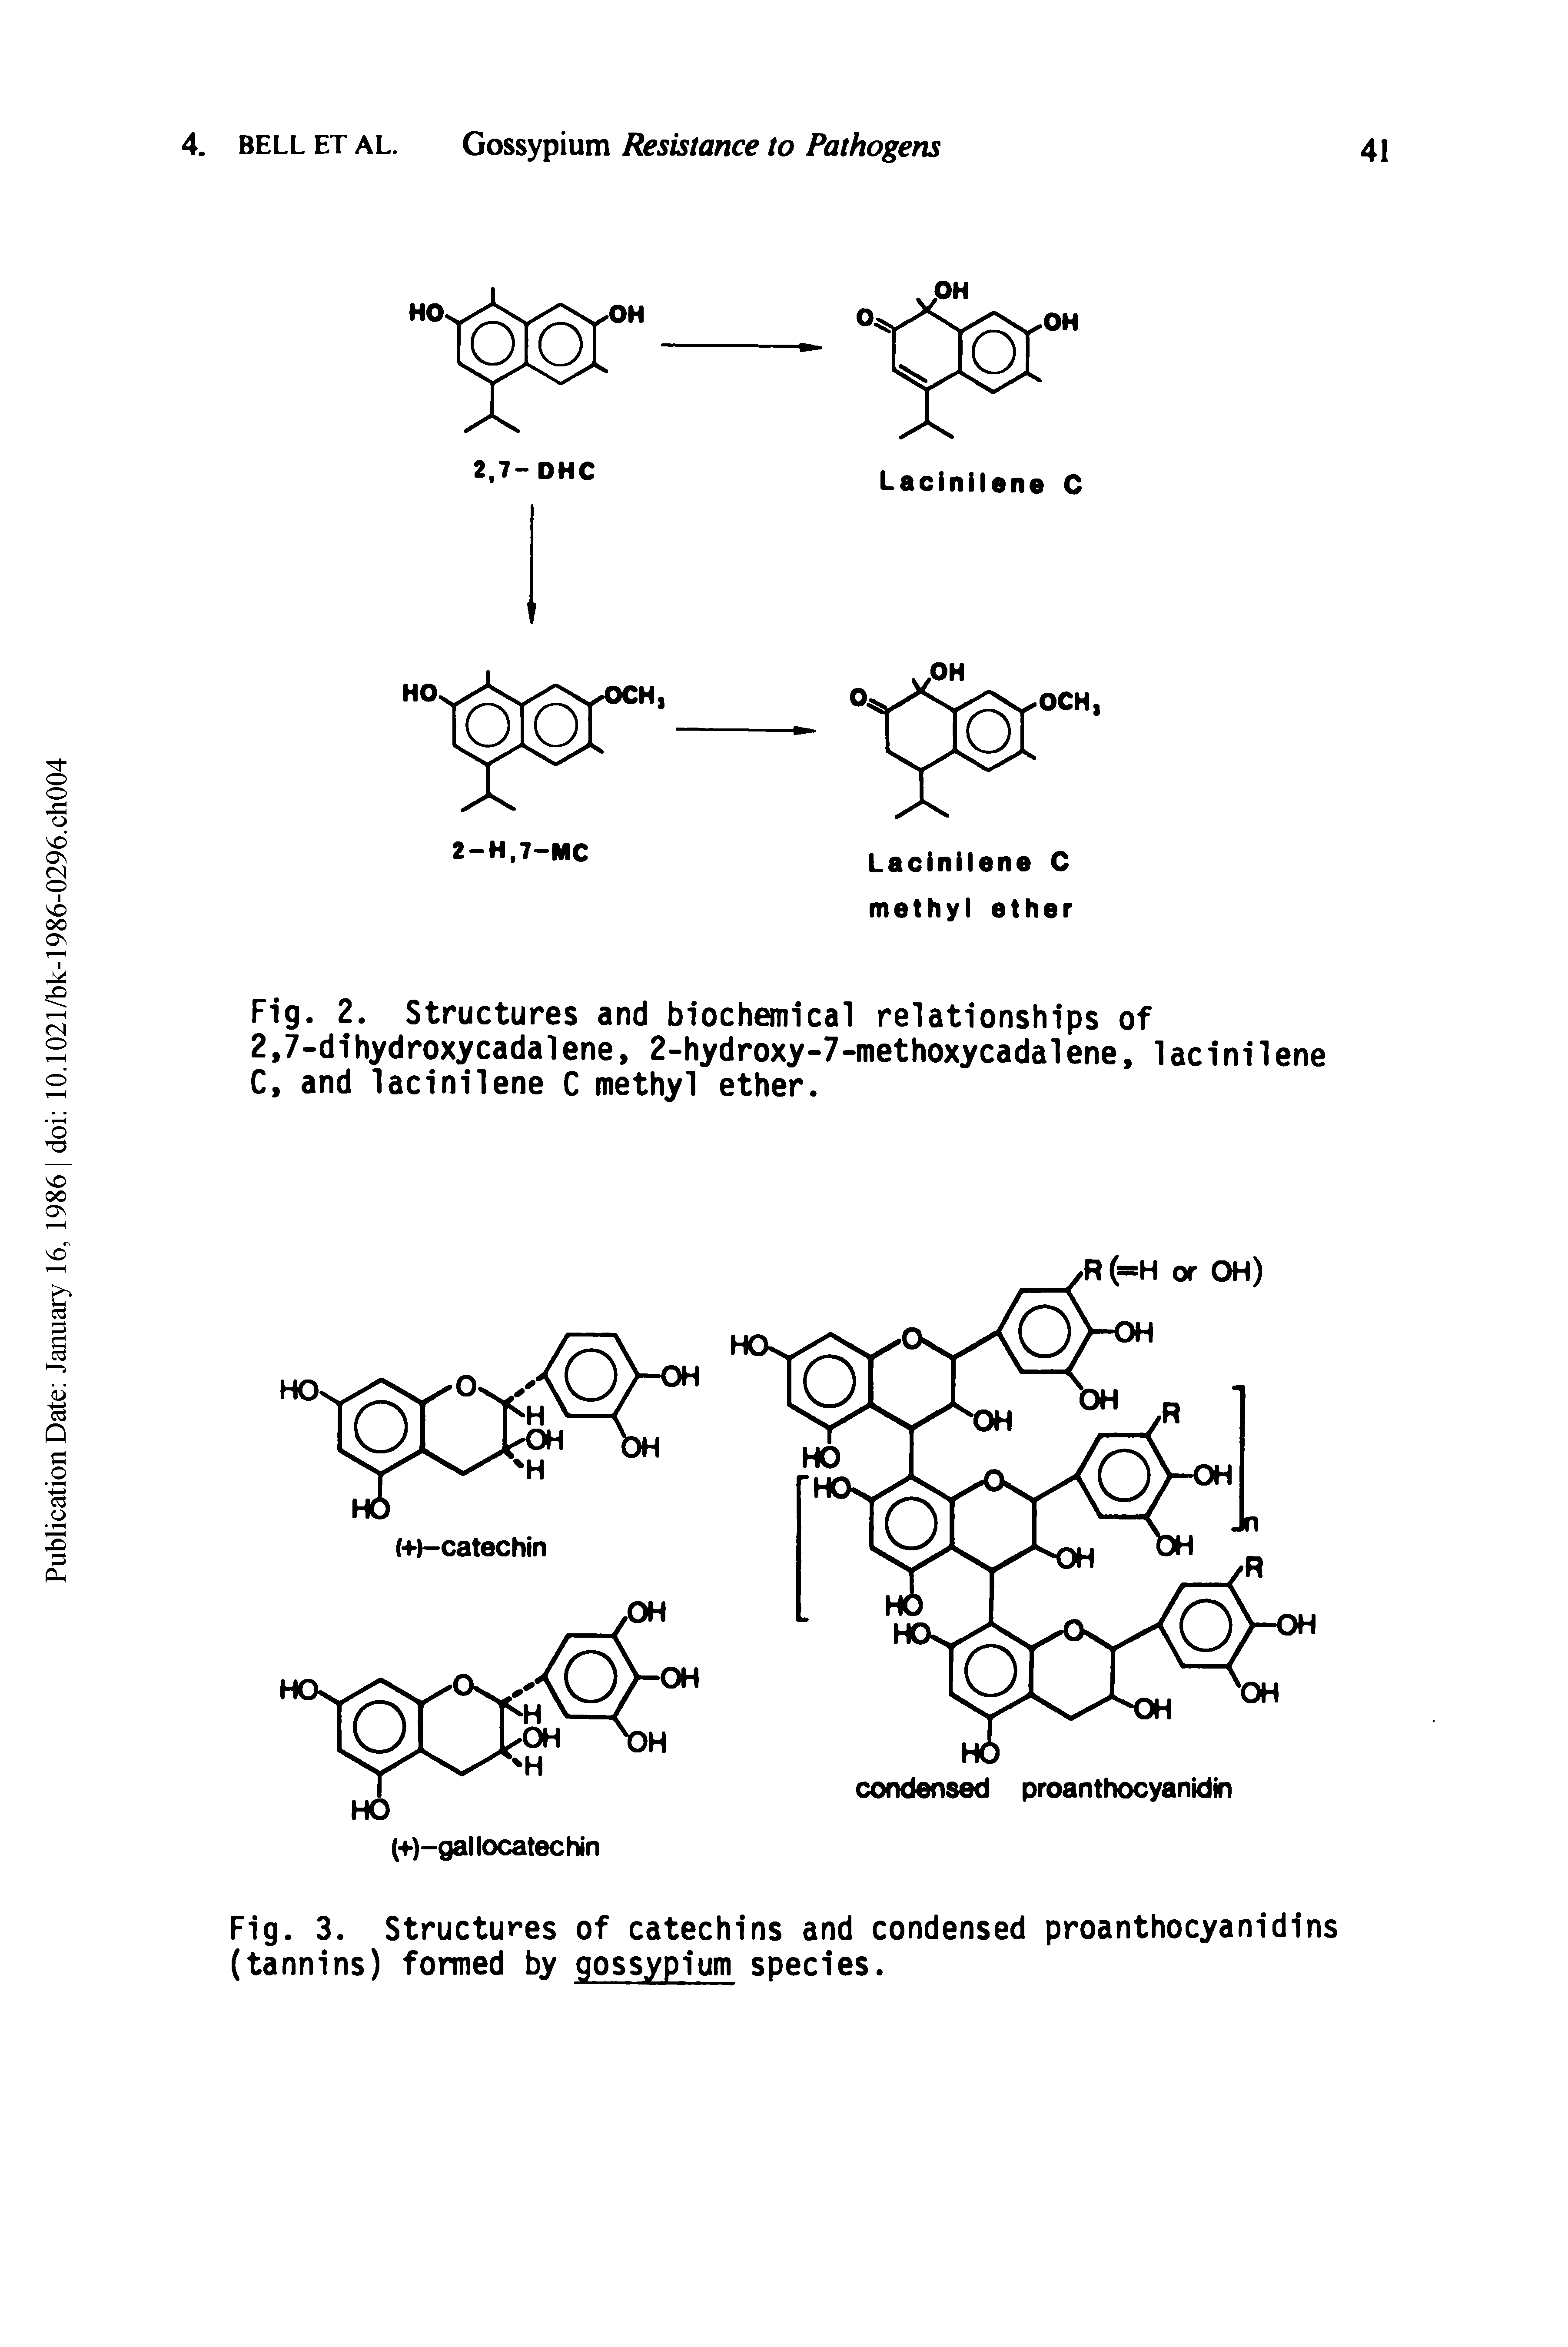 Fig. 3. Structures of catechins and condensed proanthocyanidins (tannins) formed by gossypium species.